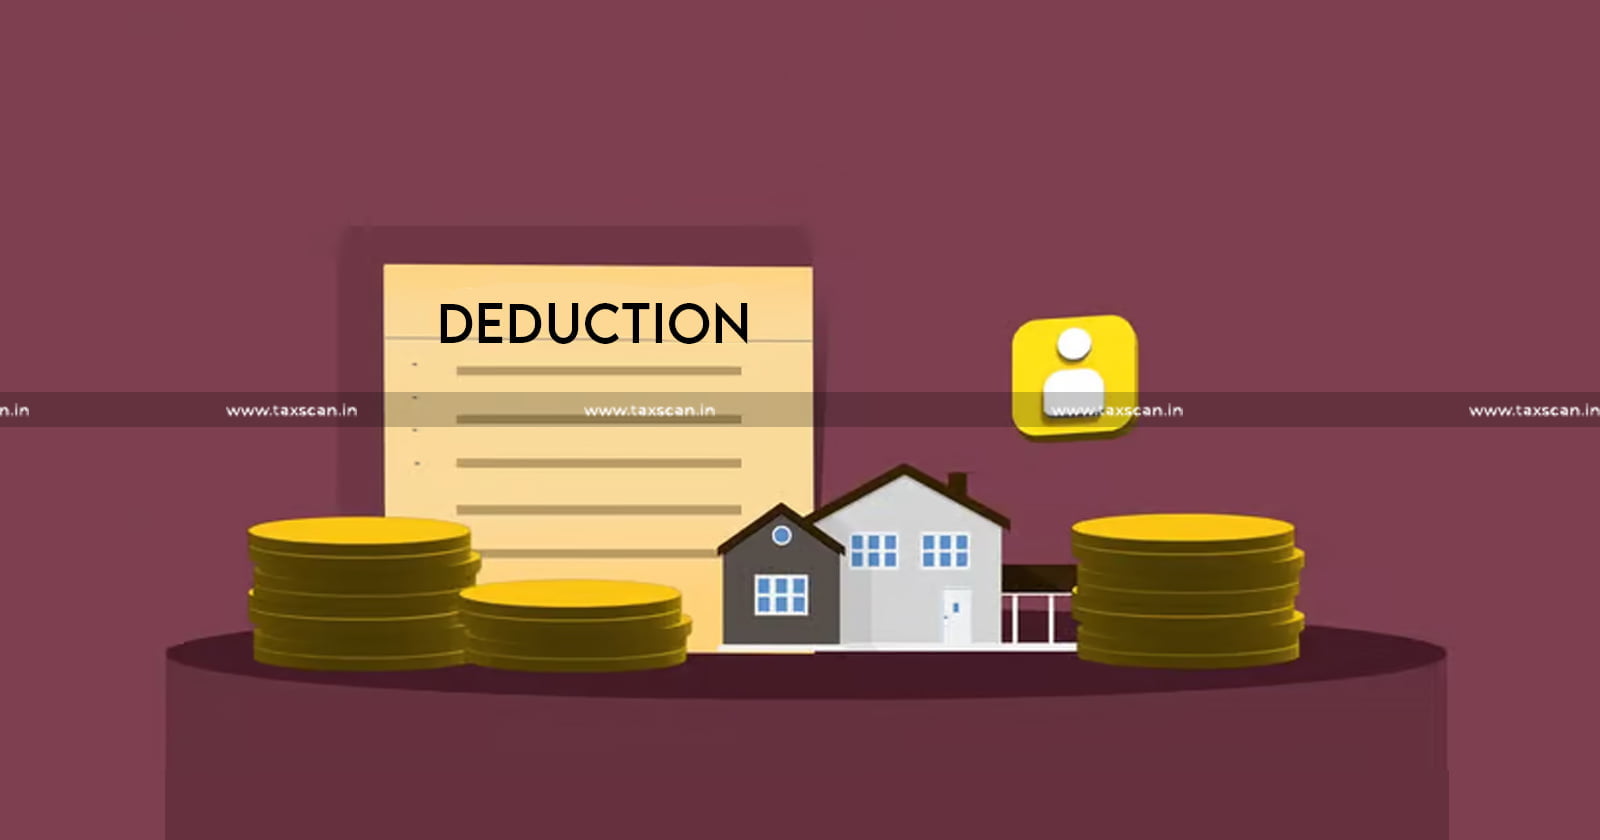 deduction -claim- allow - filing - electronic filing - form 56F - income tax - upheld - ITAT - taxscan